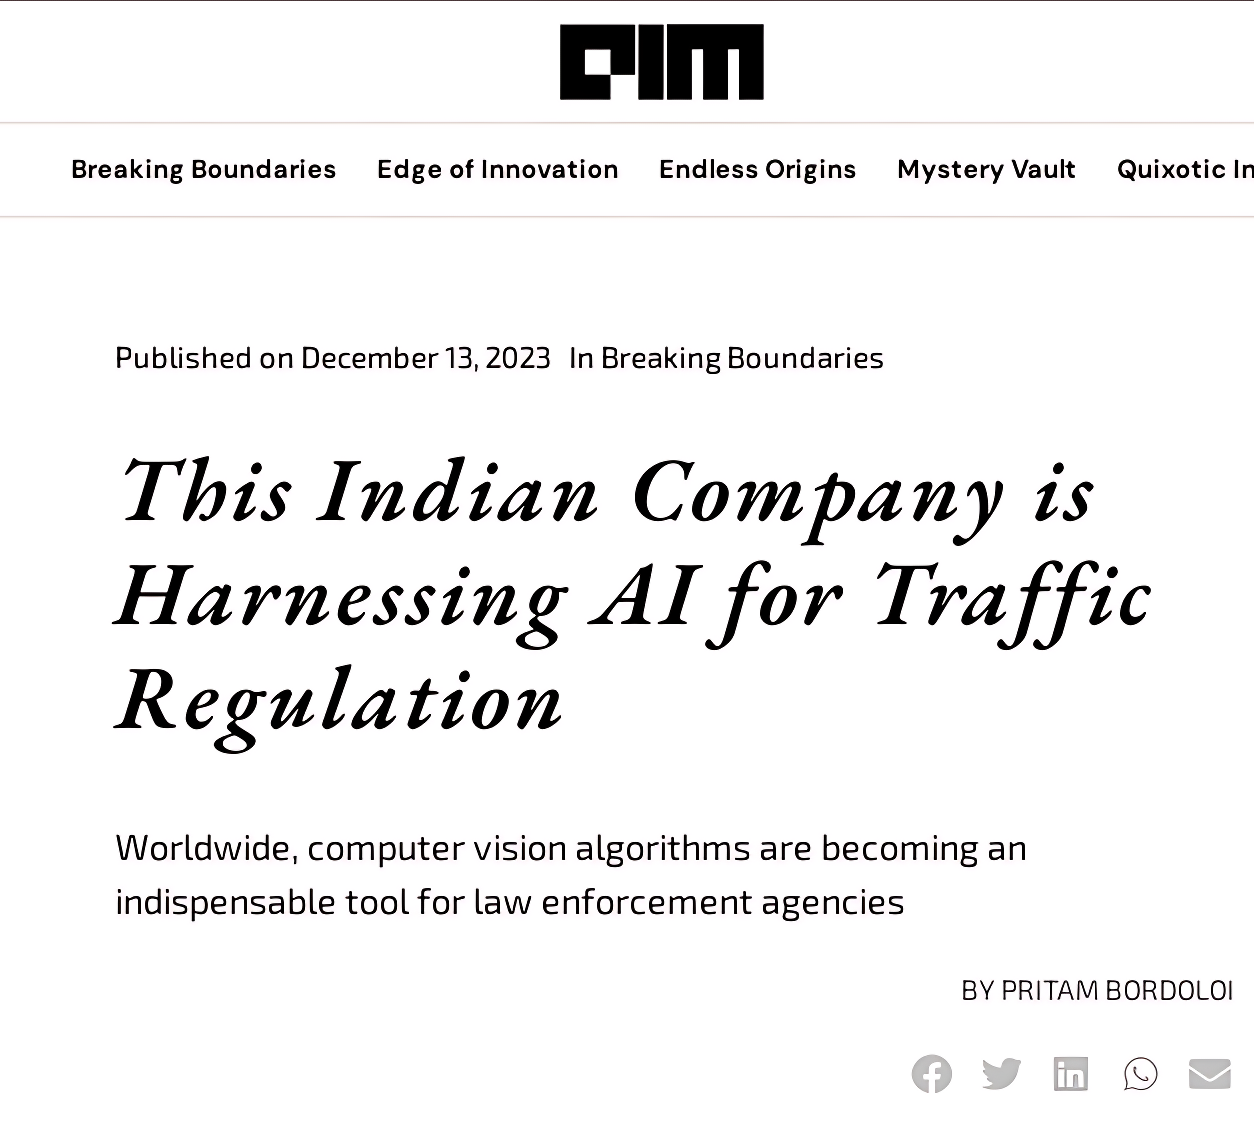 This Indian Company is Harnessing AI for Traffic Regulation